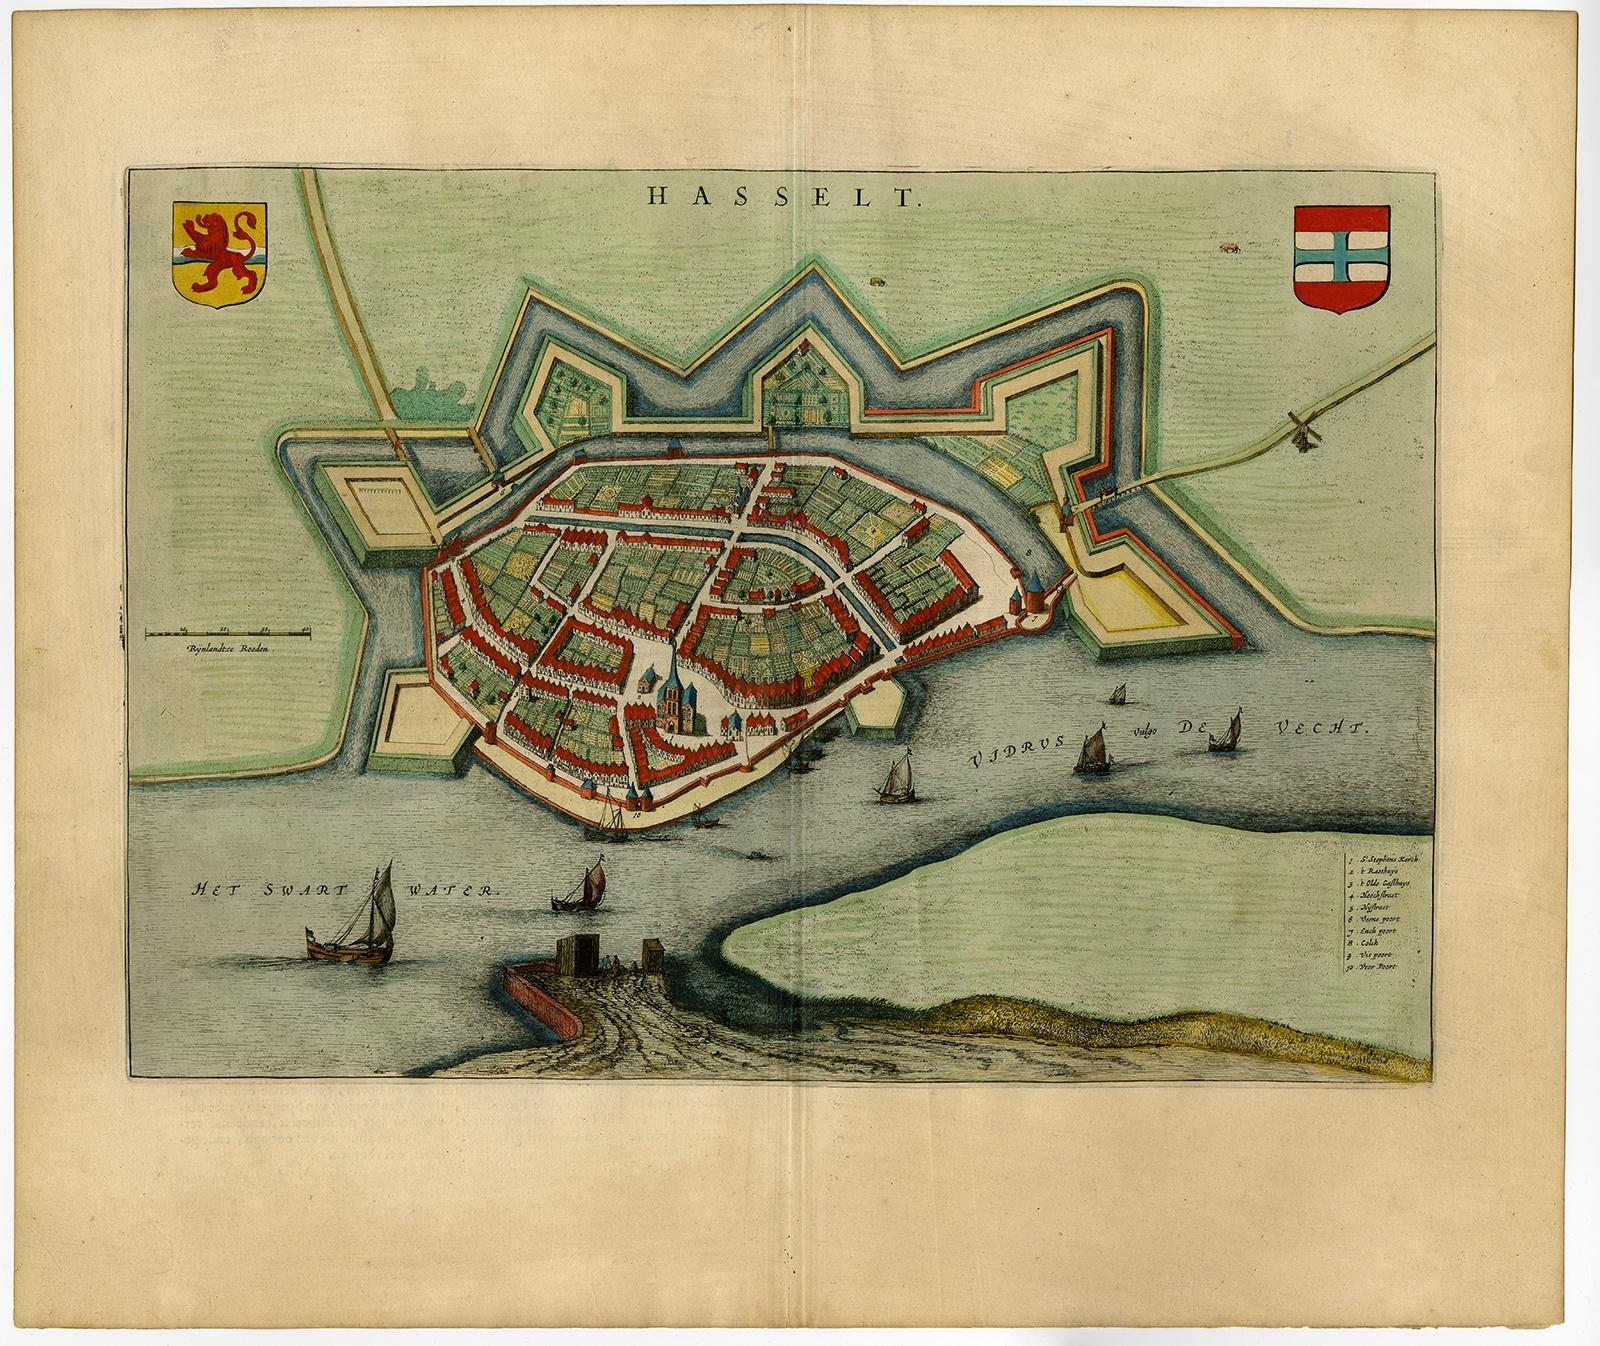 Antique print, titled: 'Hasselt.' 

Bird's-eye view plan of Hasselt in The Netherlands. With key to locations and coats of arms. Text in Dutch on verso. This plan originates from the famous city Atlas: 'Toneel der Steeden' published by Joan Blaeu